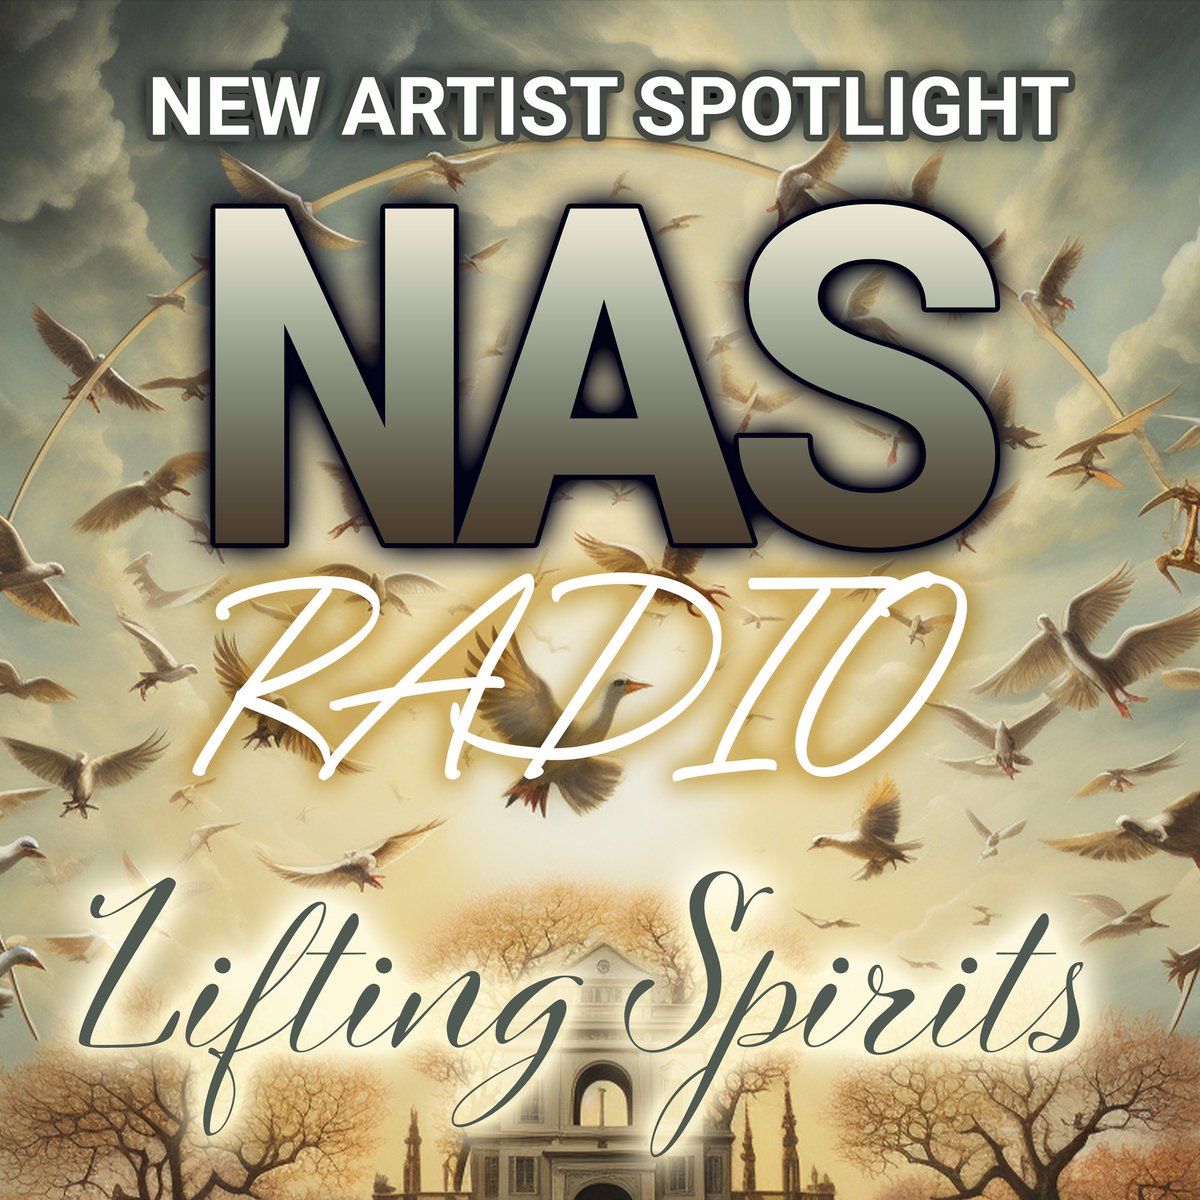 Looking for some uplifting music? Check out 'Lifting Spirits' on @NASIndieRadio 📻🪽 Coming up in 1 hour and featuring #indiemusic from the @NAS_Spotlight newartistspotlight.org/radio